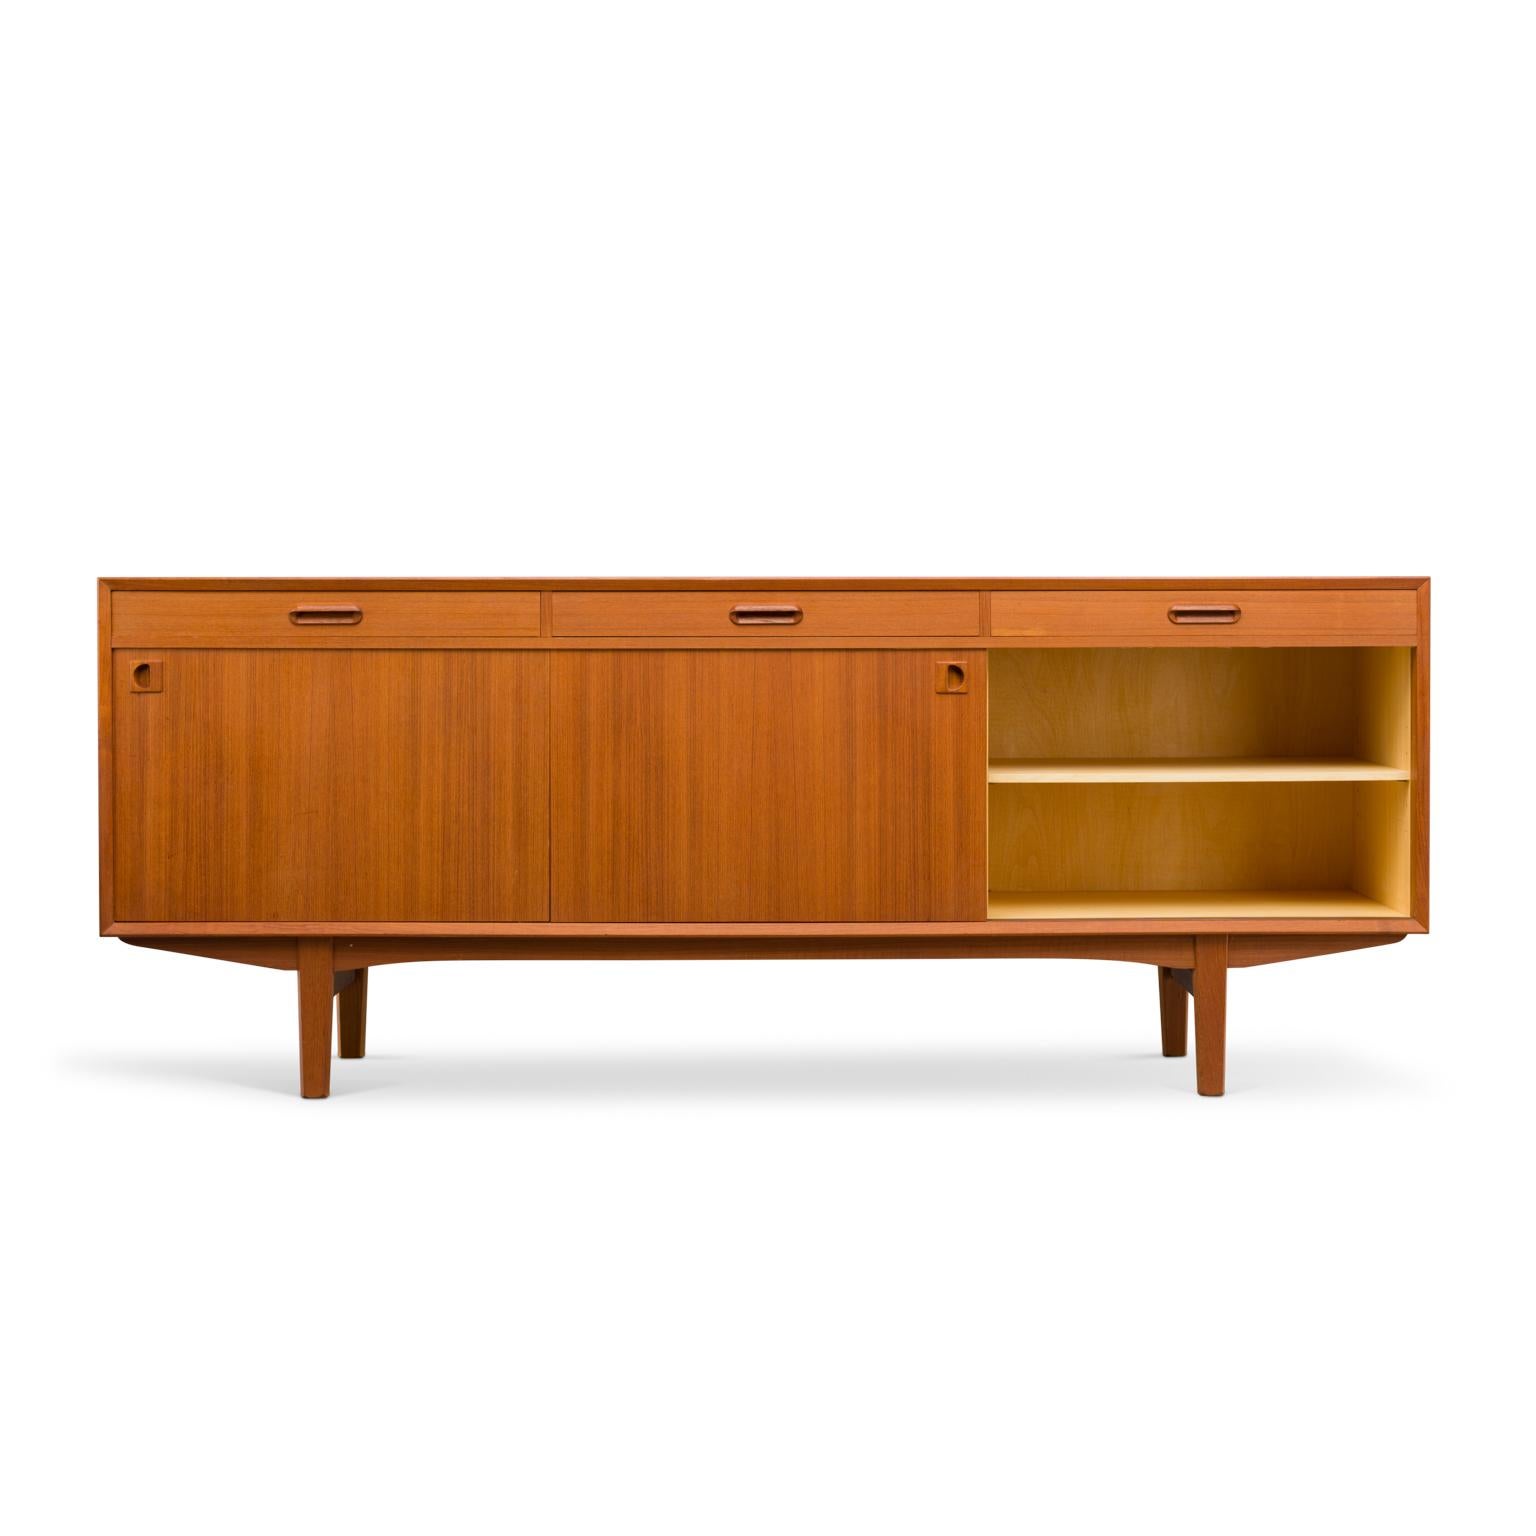 This Danish modern teak sideboard is a top quality chest from Skovby Møbelfabrik. Drawers close with precision fit and have dovetail joints. Used materials are of high quality and the base indicates high end. The base of this credenza is off solid